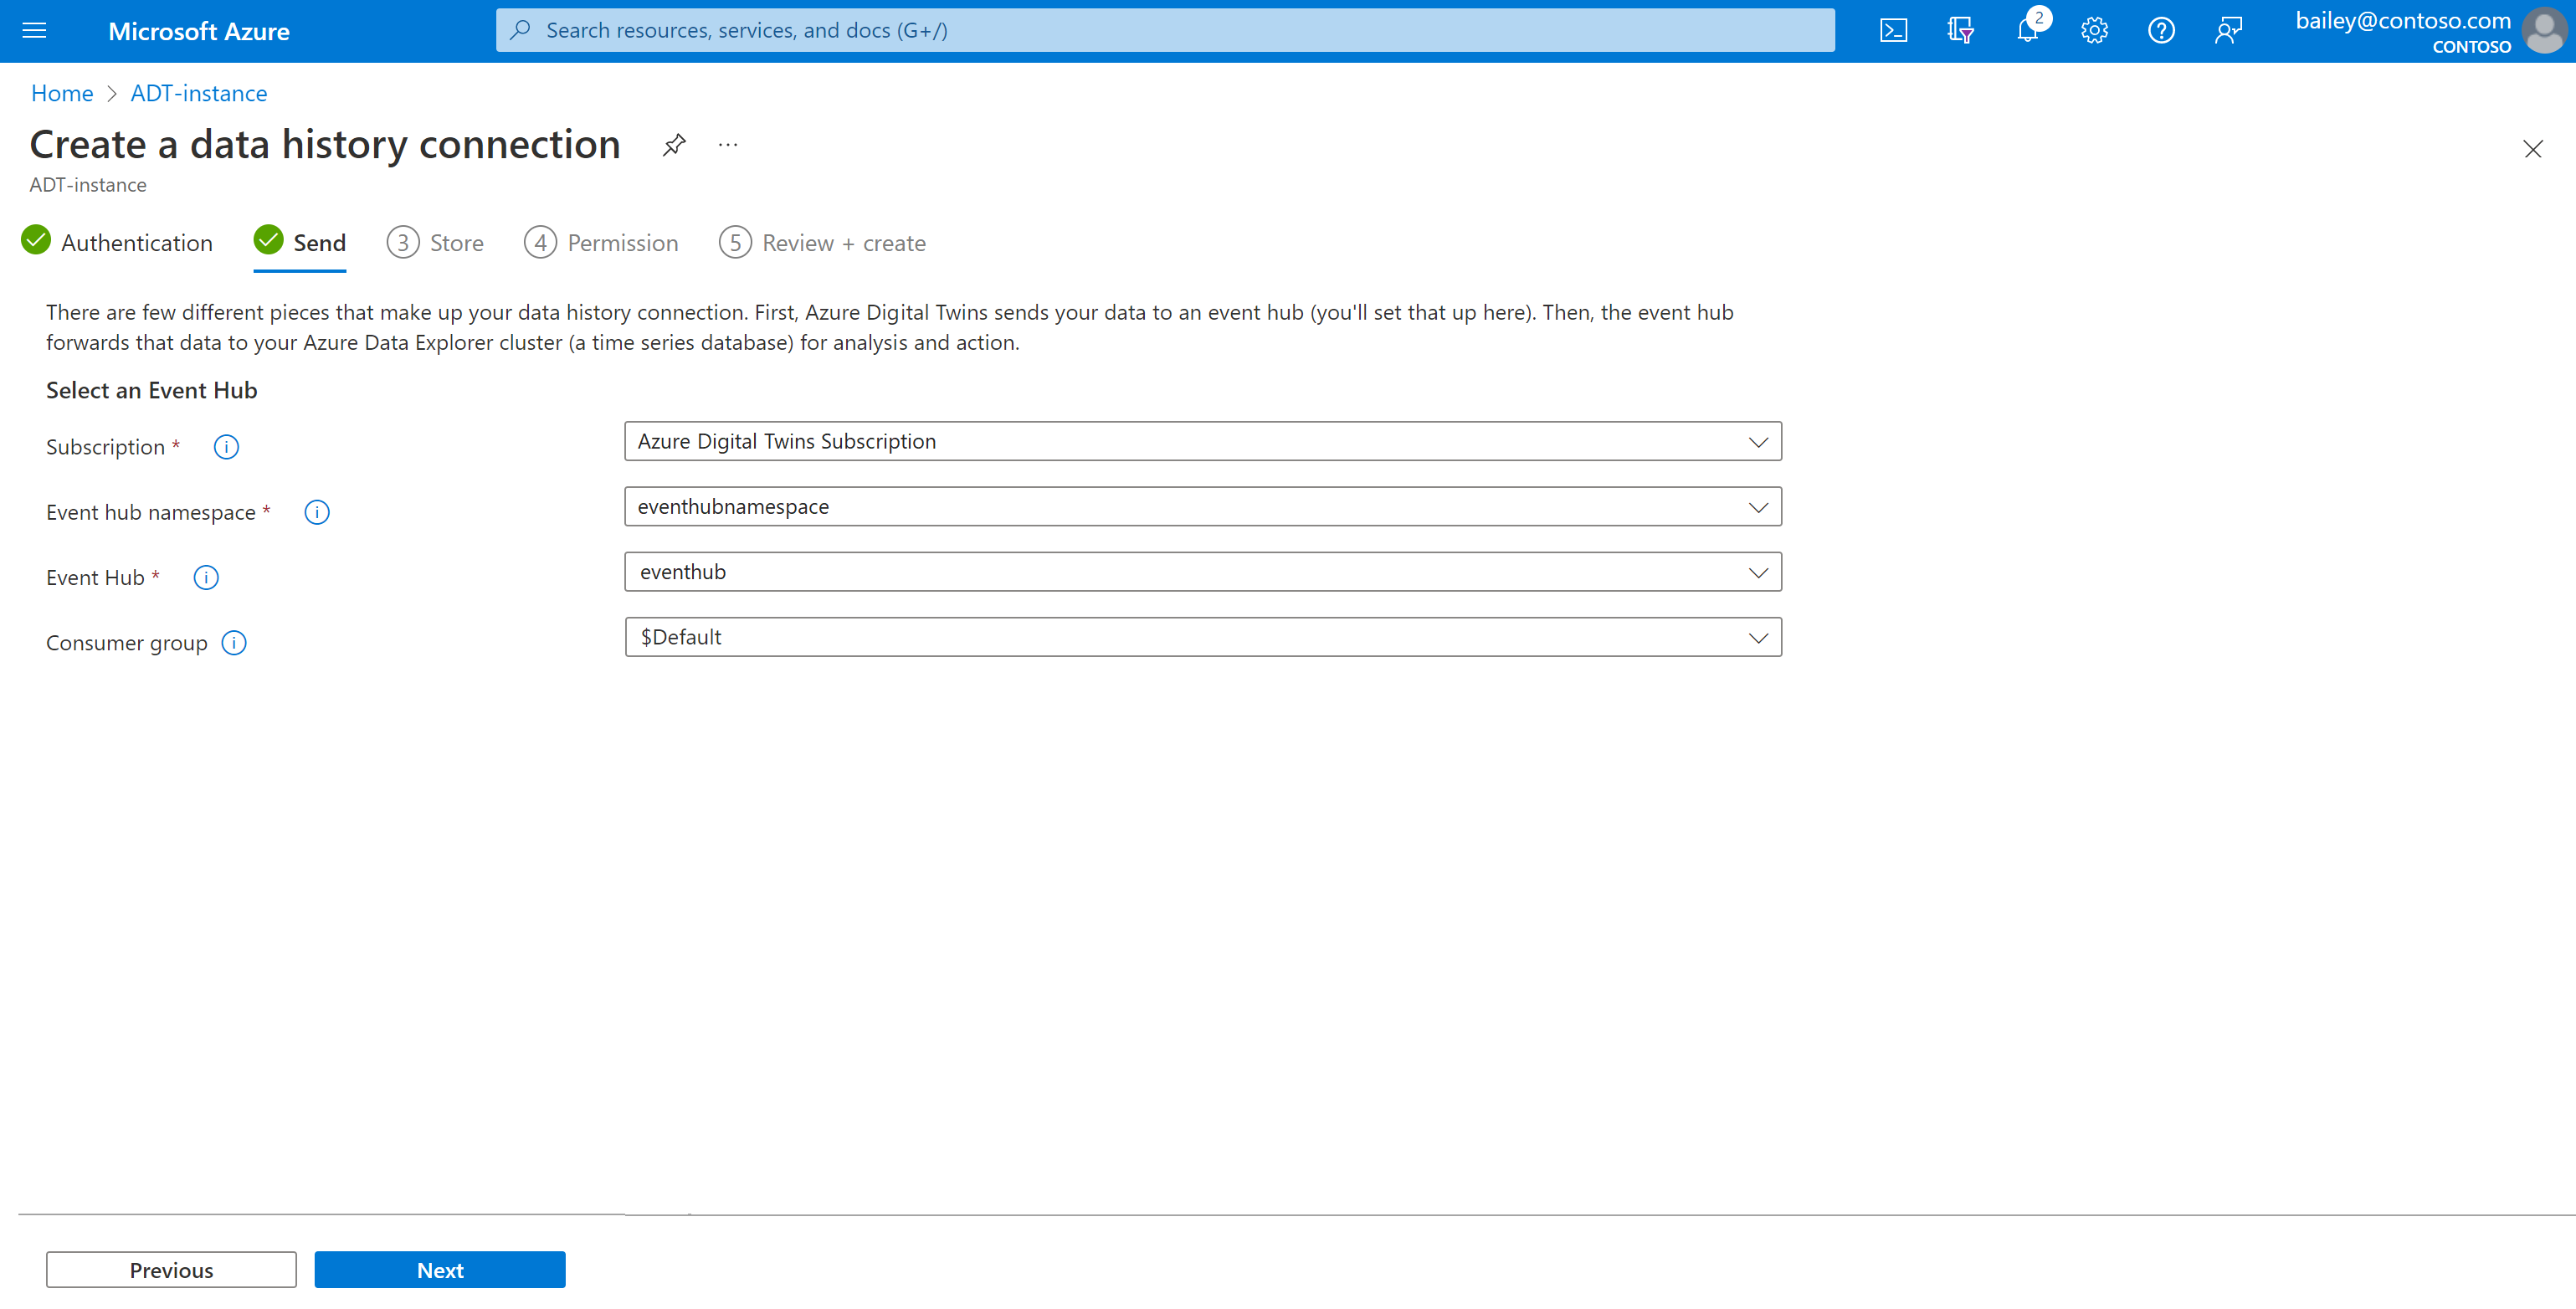 Screenshot of the Azure portal showing the Send step in the data history connection setup.